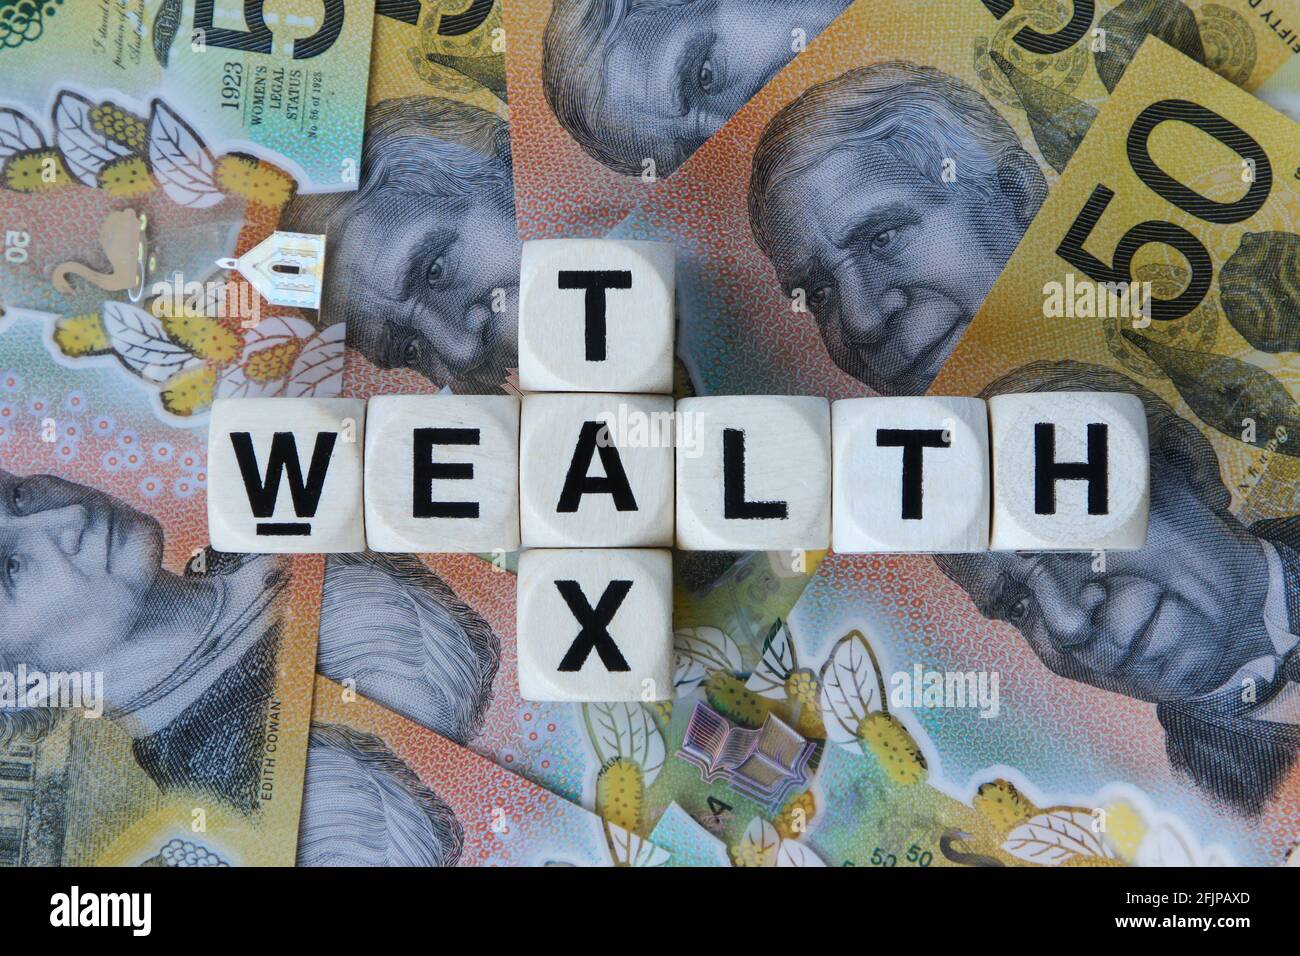 Wealth tax signage on a background of Australian dollars. Stock Photo